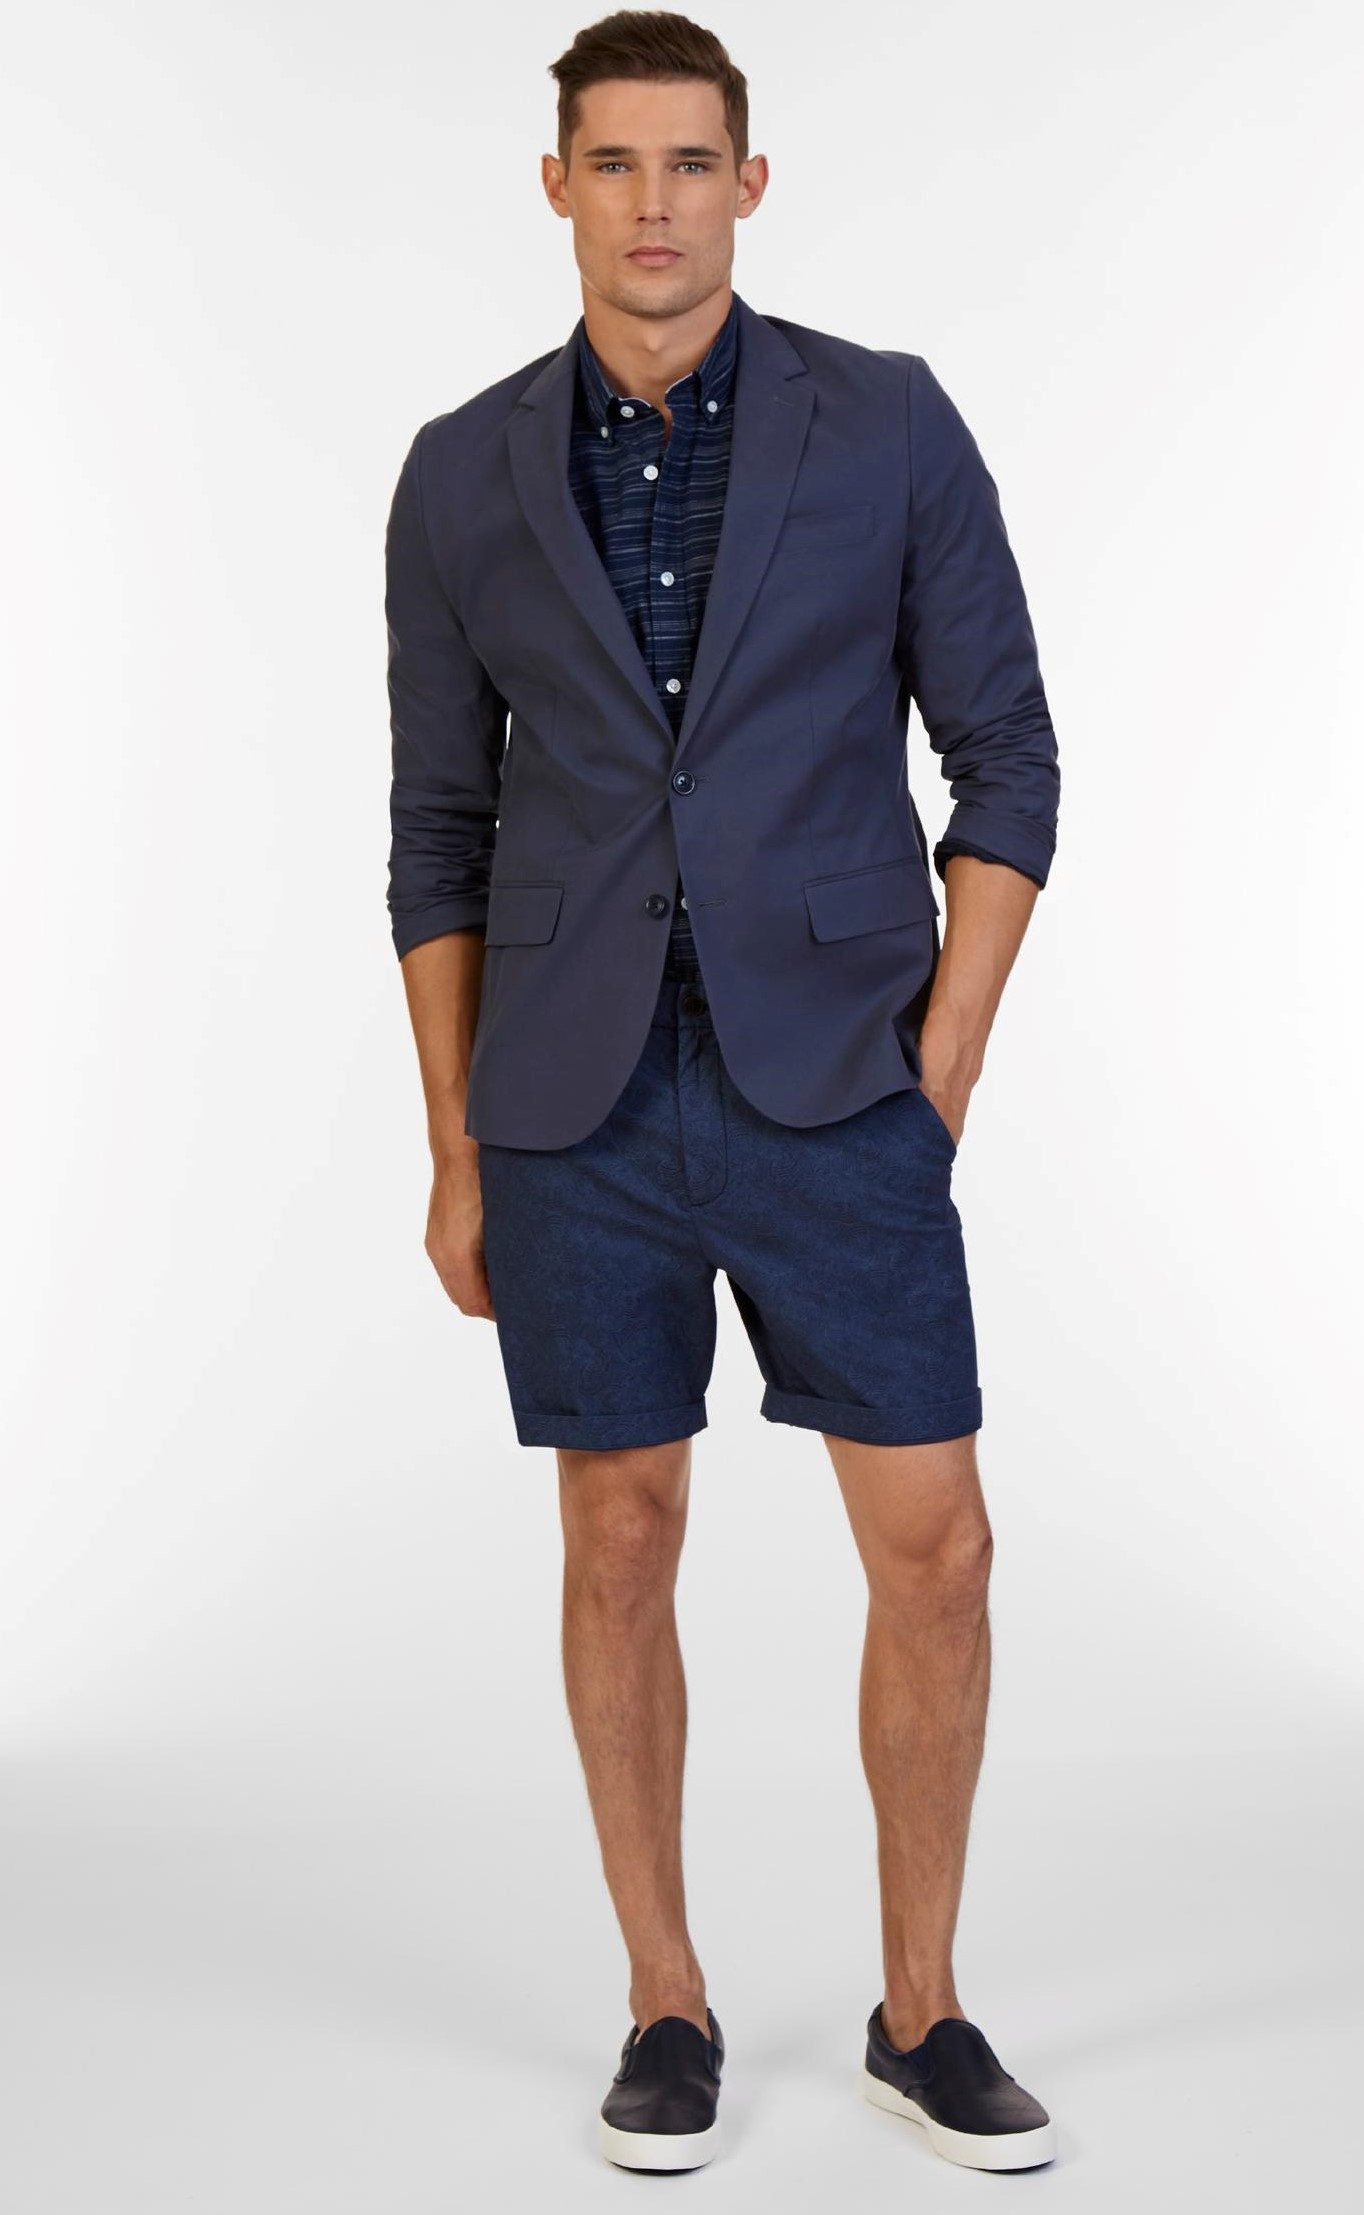 Mens Beach Wedding Attire
 Guy Guide What to Wear for Beach Weddings – Pinoy Guy Guide